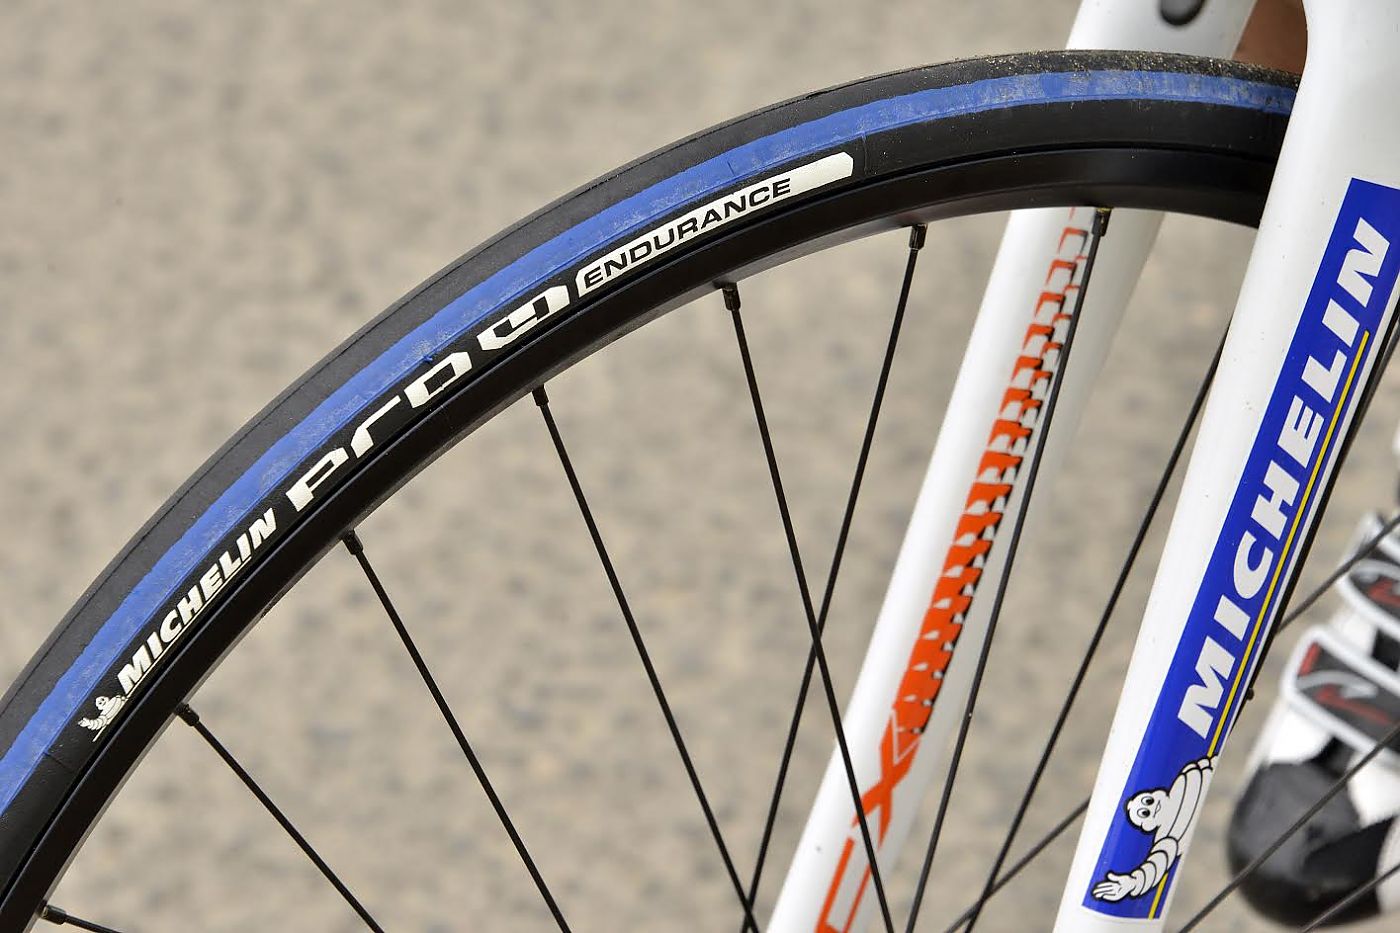 offers wider PRO4 Endurance tire | Bicycle Retailer and News